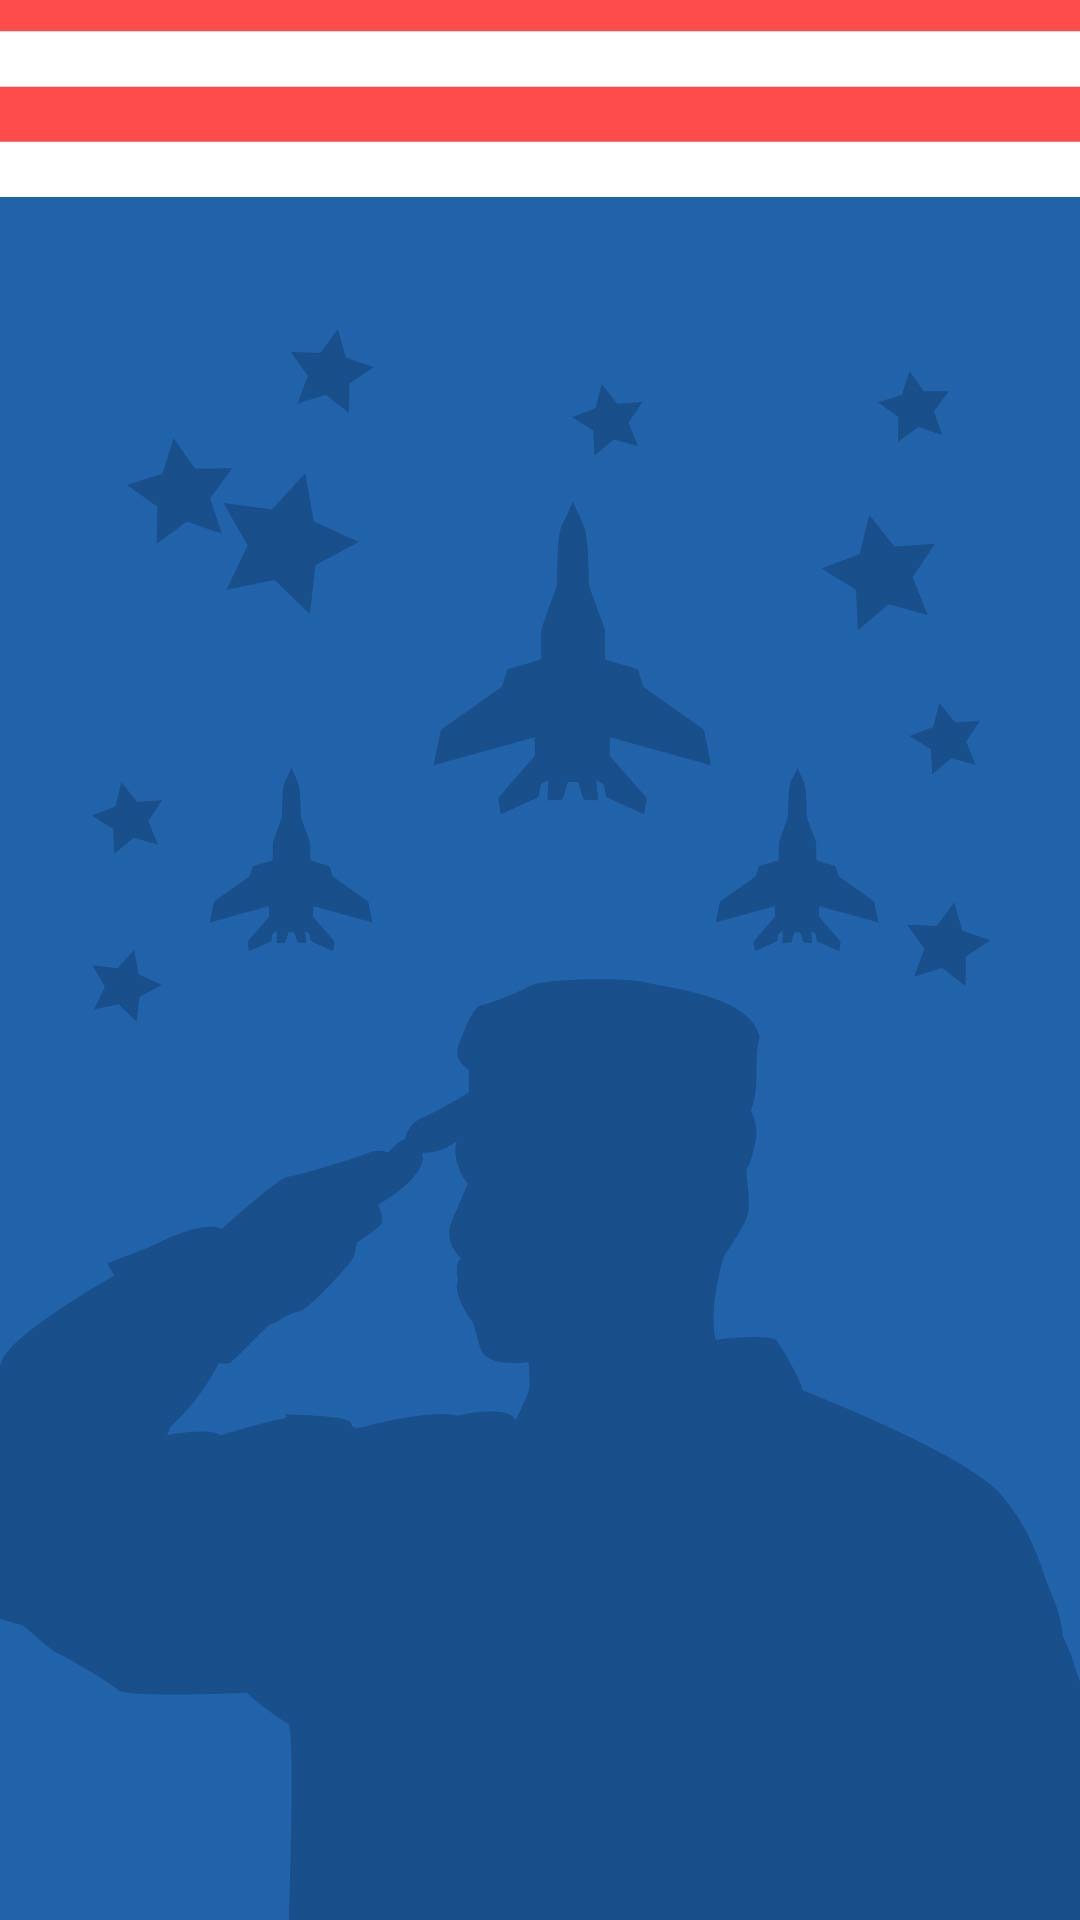 Free Armed Forces Day iPhone Background in PDF, Illustrator, PSD, EPS, SVG, JPG, PNG